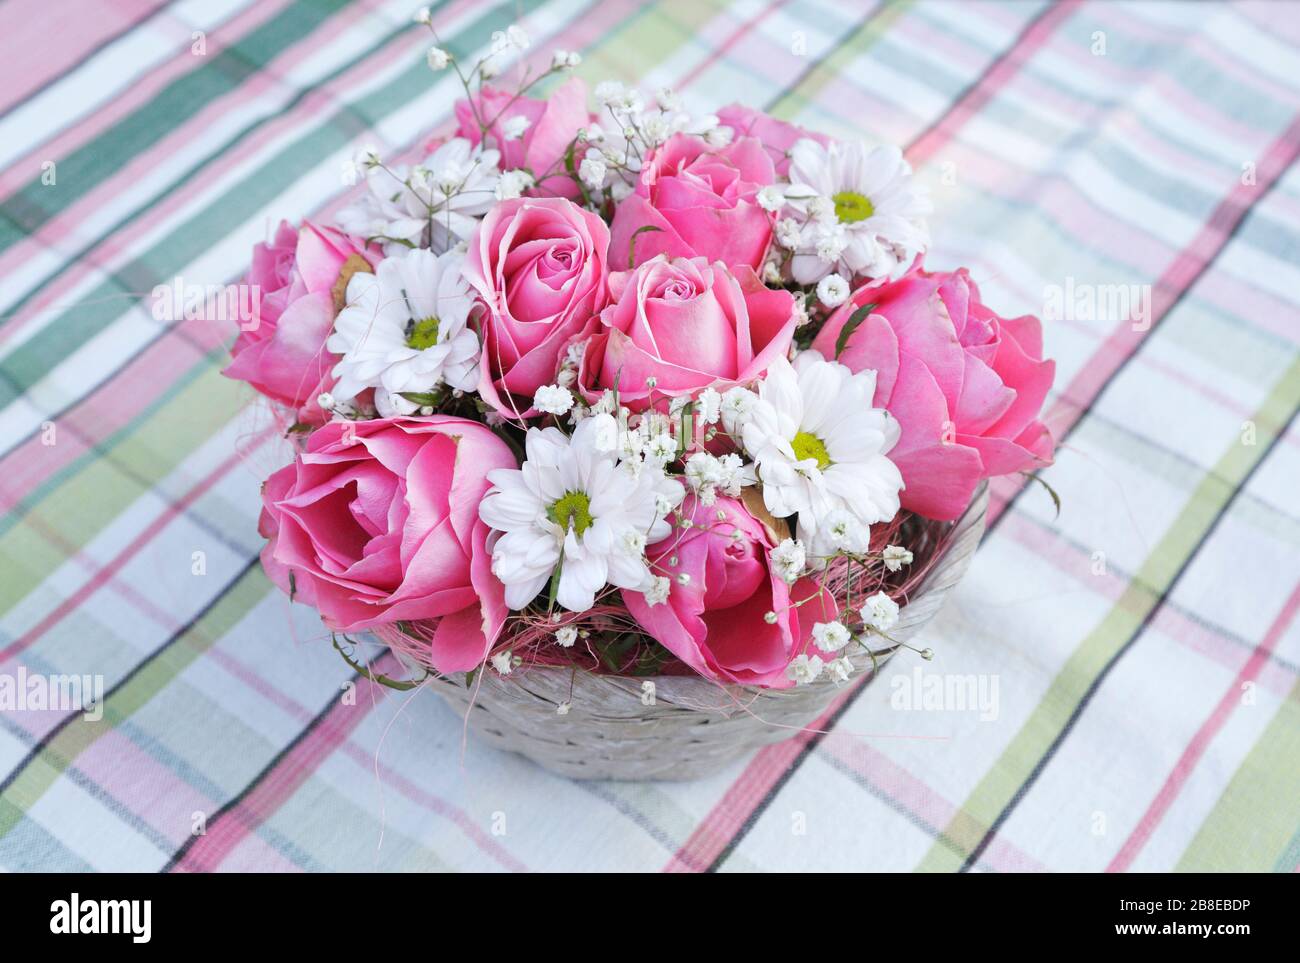 Roses, Chrysanthemum, and Gypsophila arranged in a basket, August Stock Photo